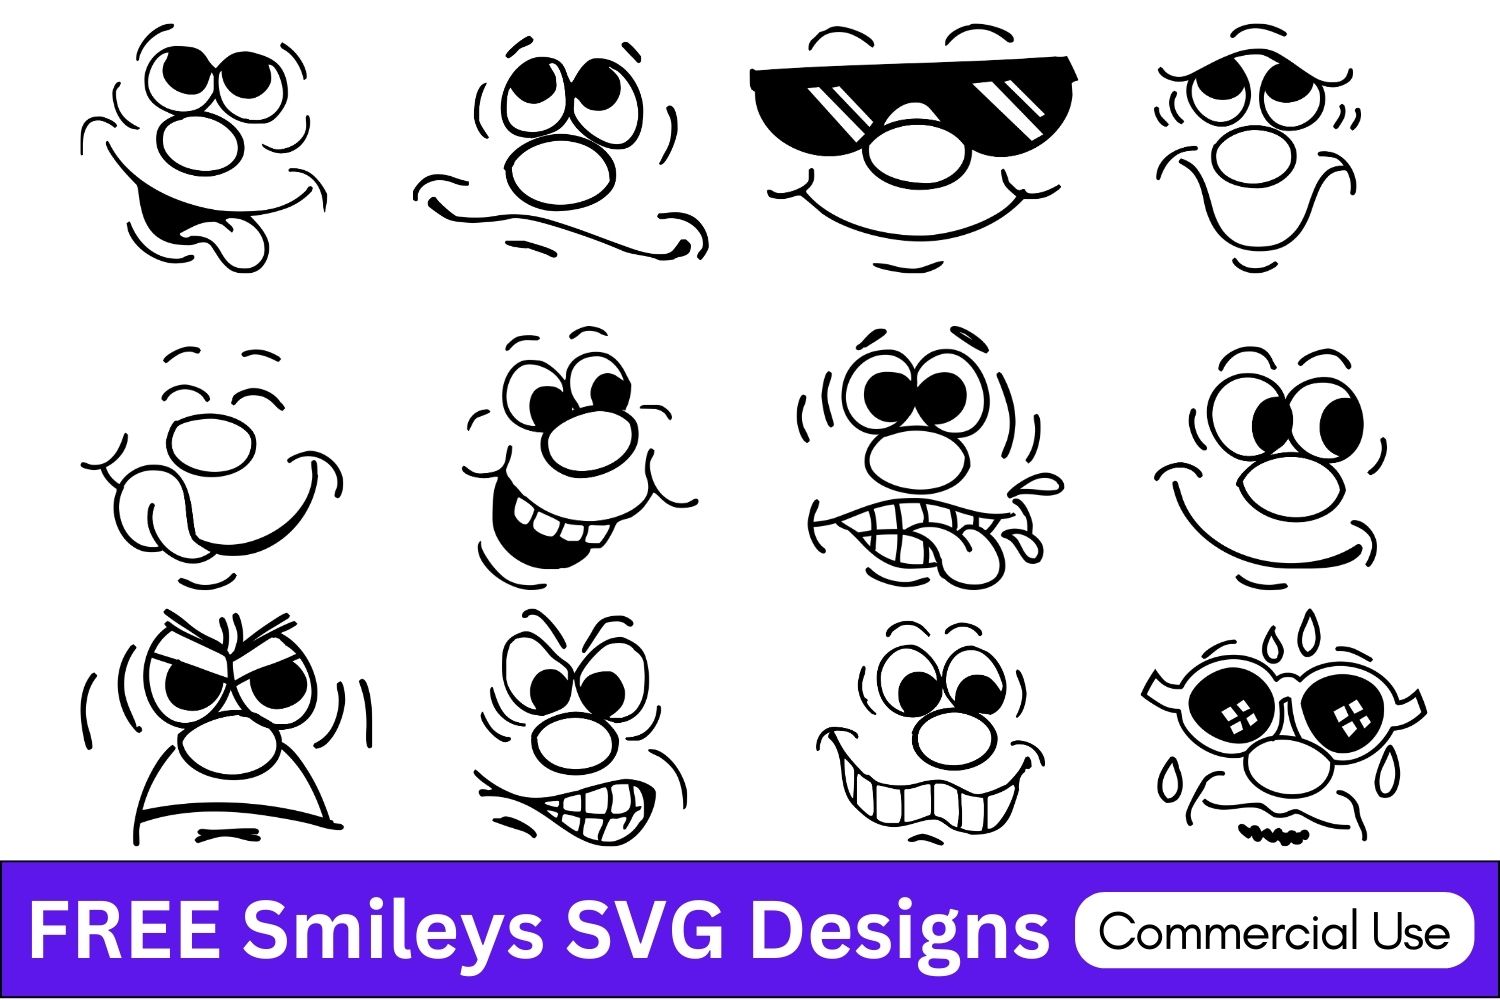 smiley svgs, Smiley Vector Template, Smiley, Smileys Template, cricut, download, svg, clipart, designs, smile, free